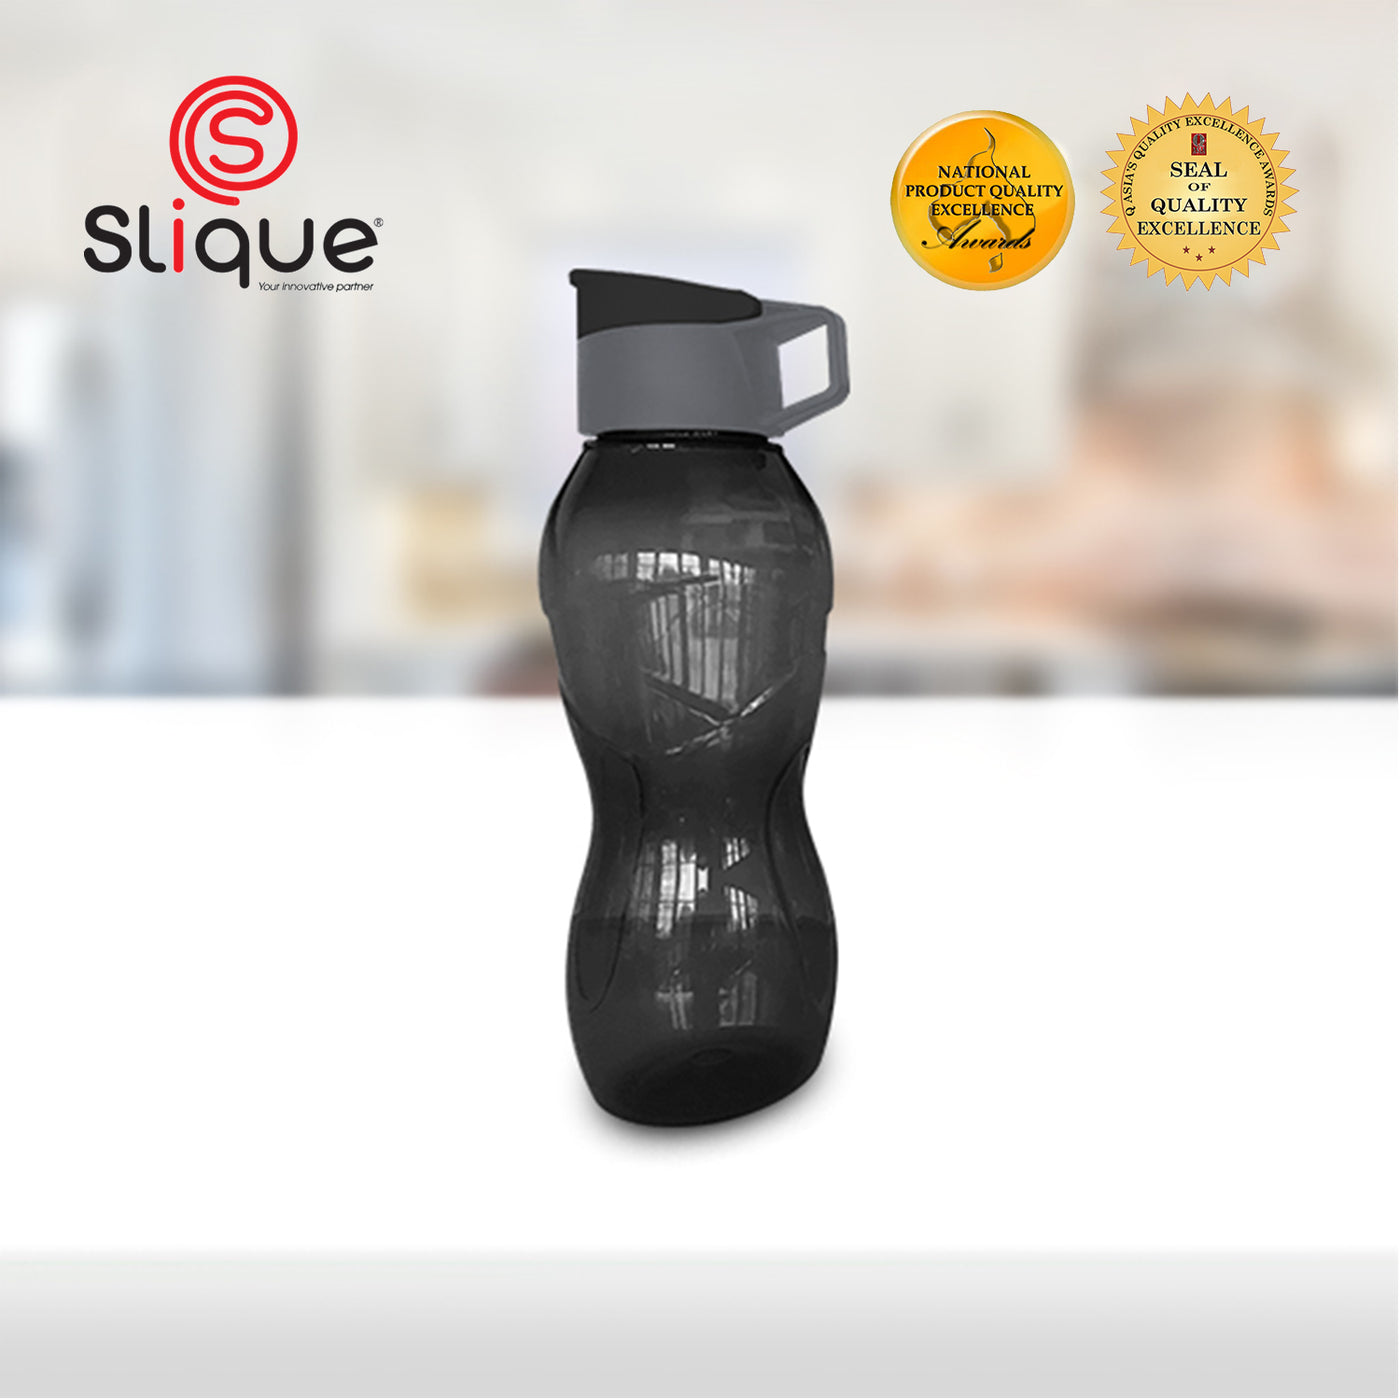 SLIQUE PP Sports Water Bottle BPA Free 800ml Set of 3 Modern Italian Design Amazing Gift Idea For Any Occasion!